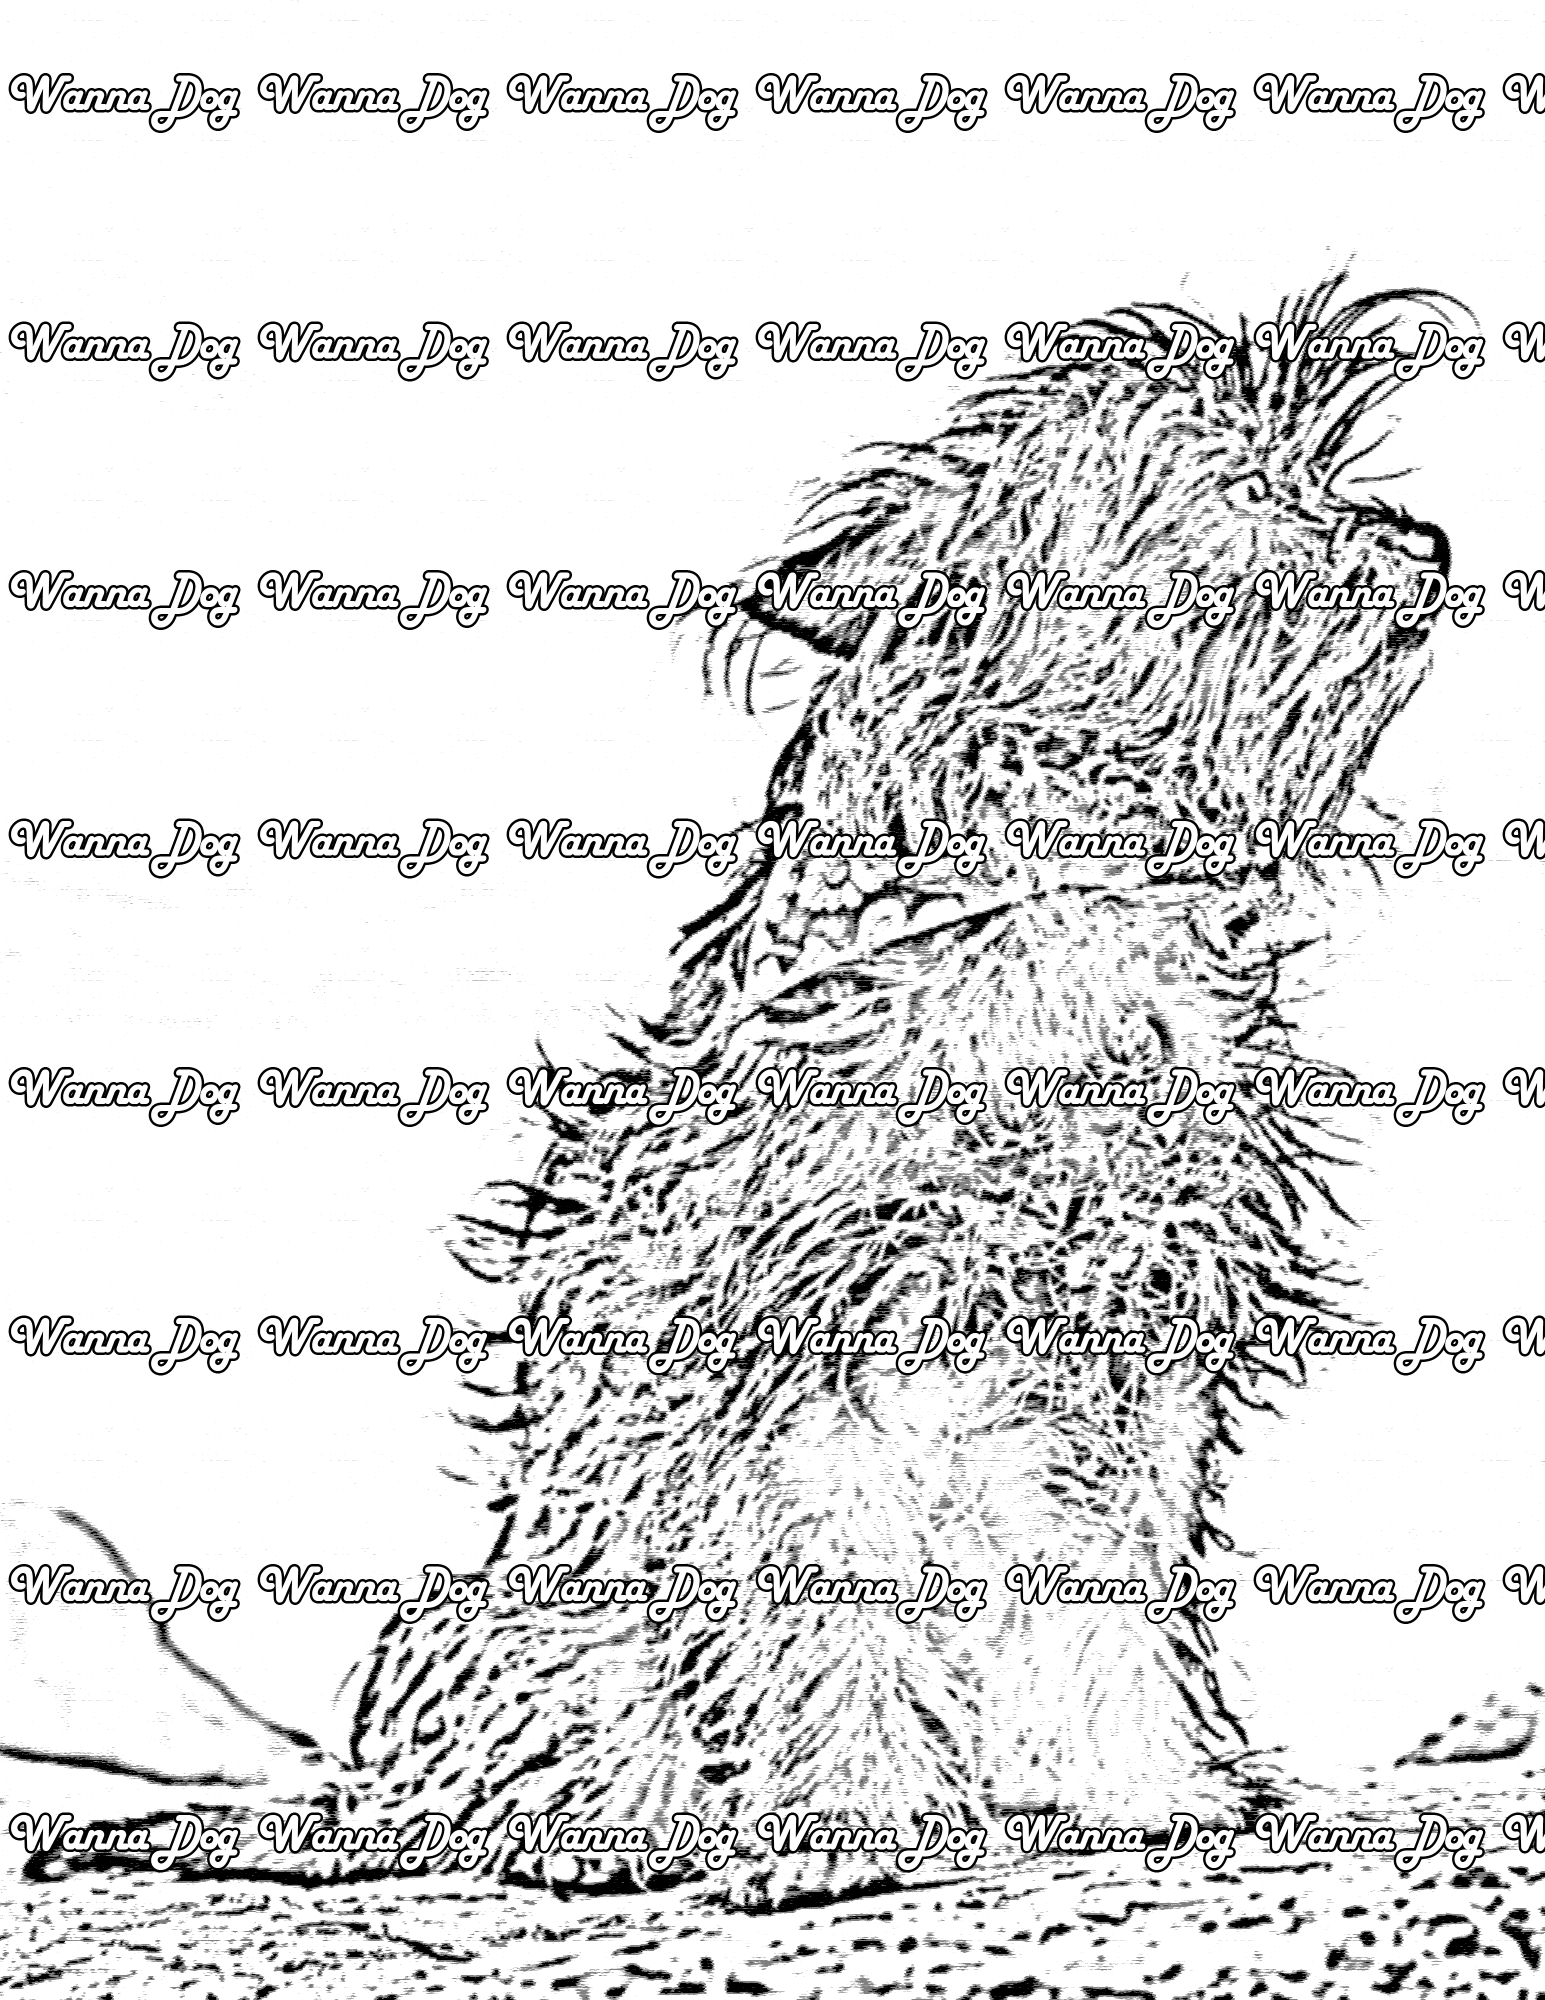 Cairn Terrier Coloring Page of a Cairn Terrier sitting at the beach